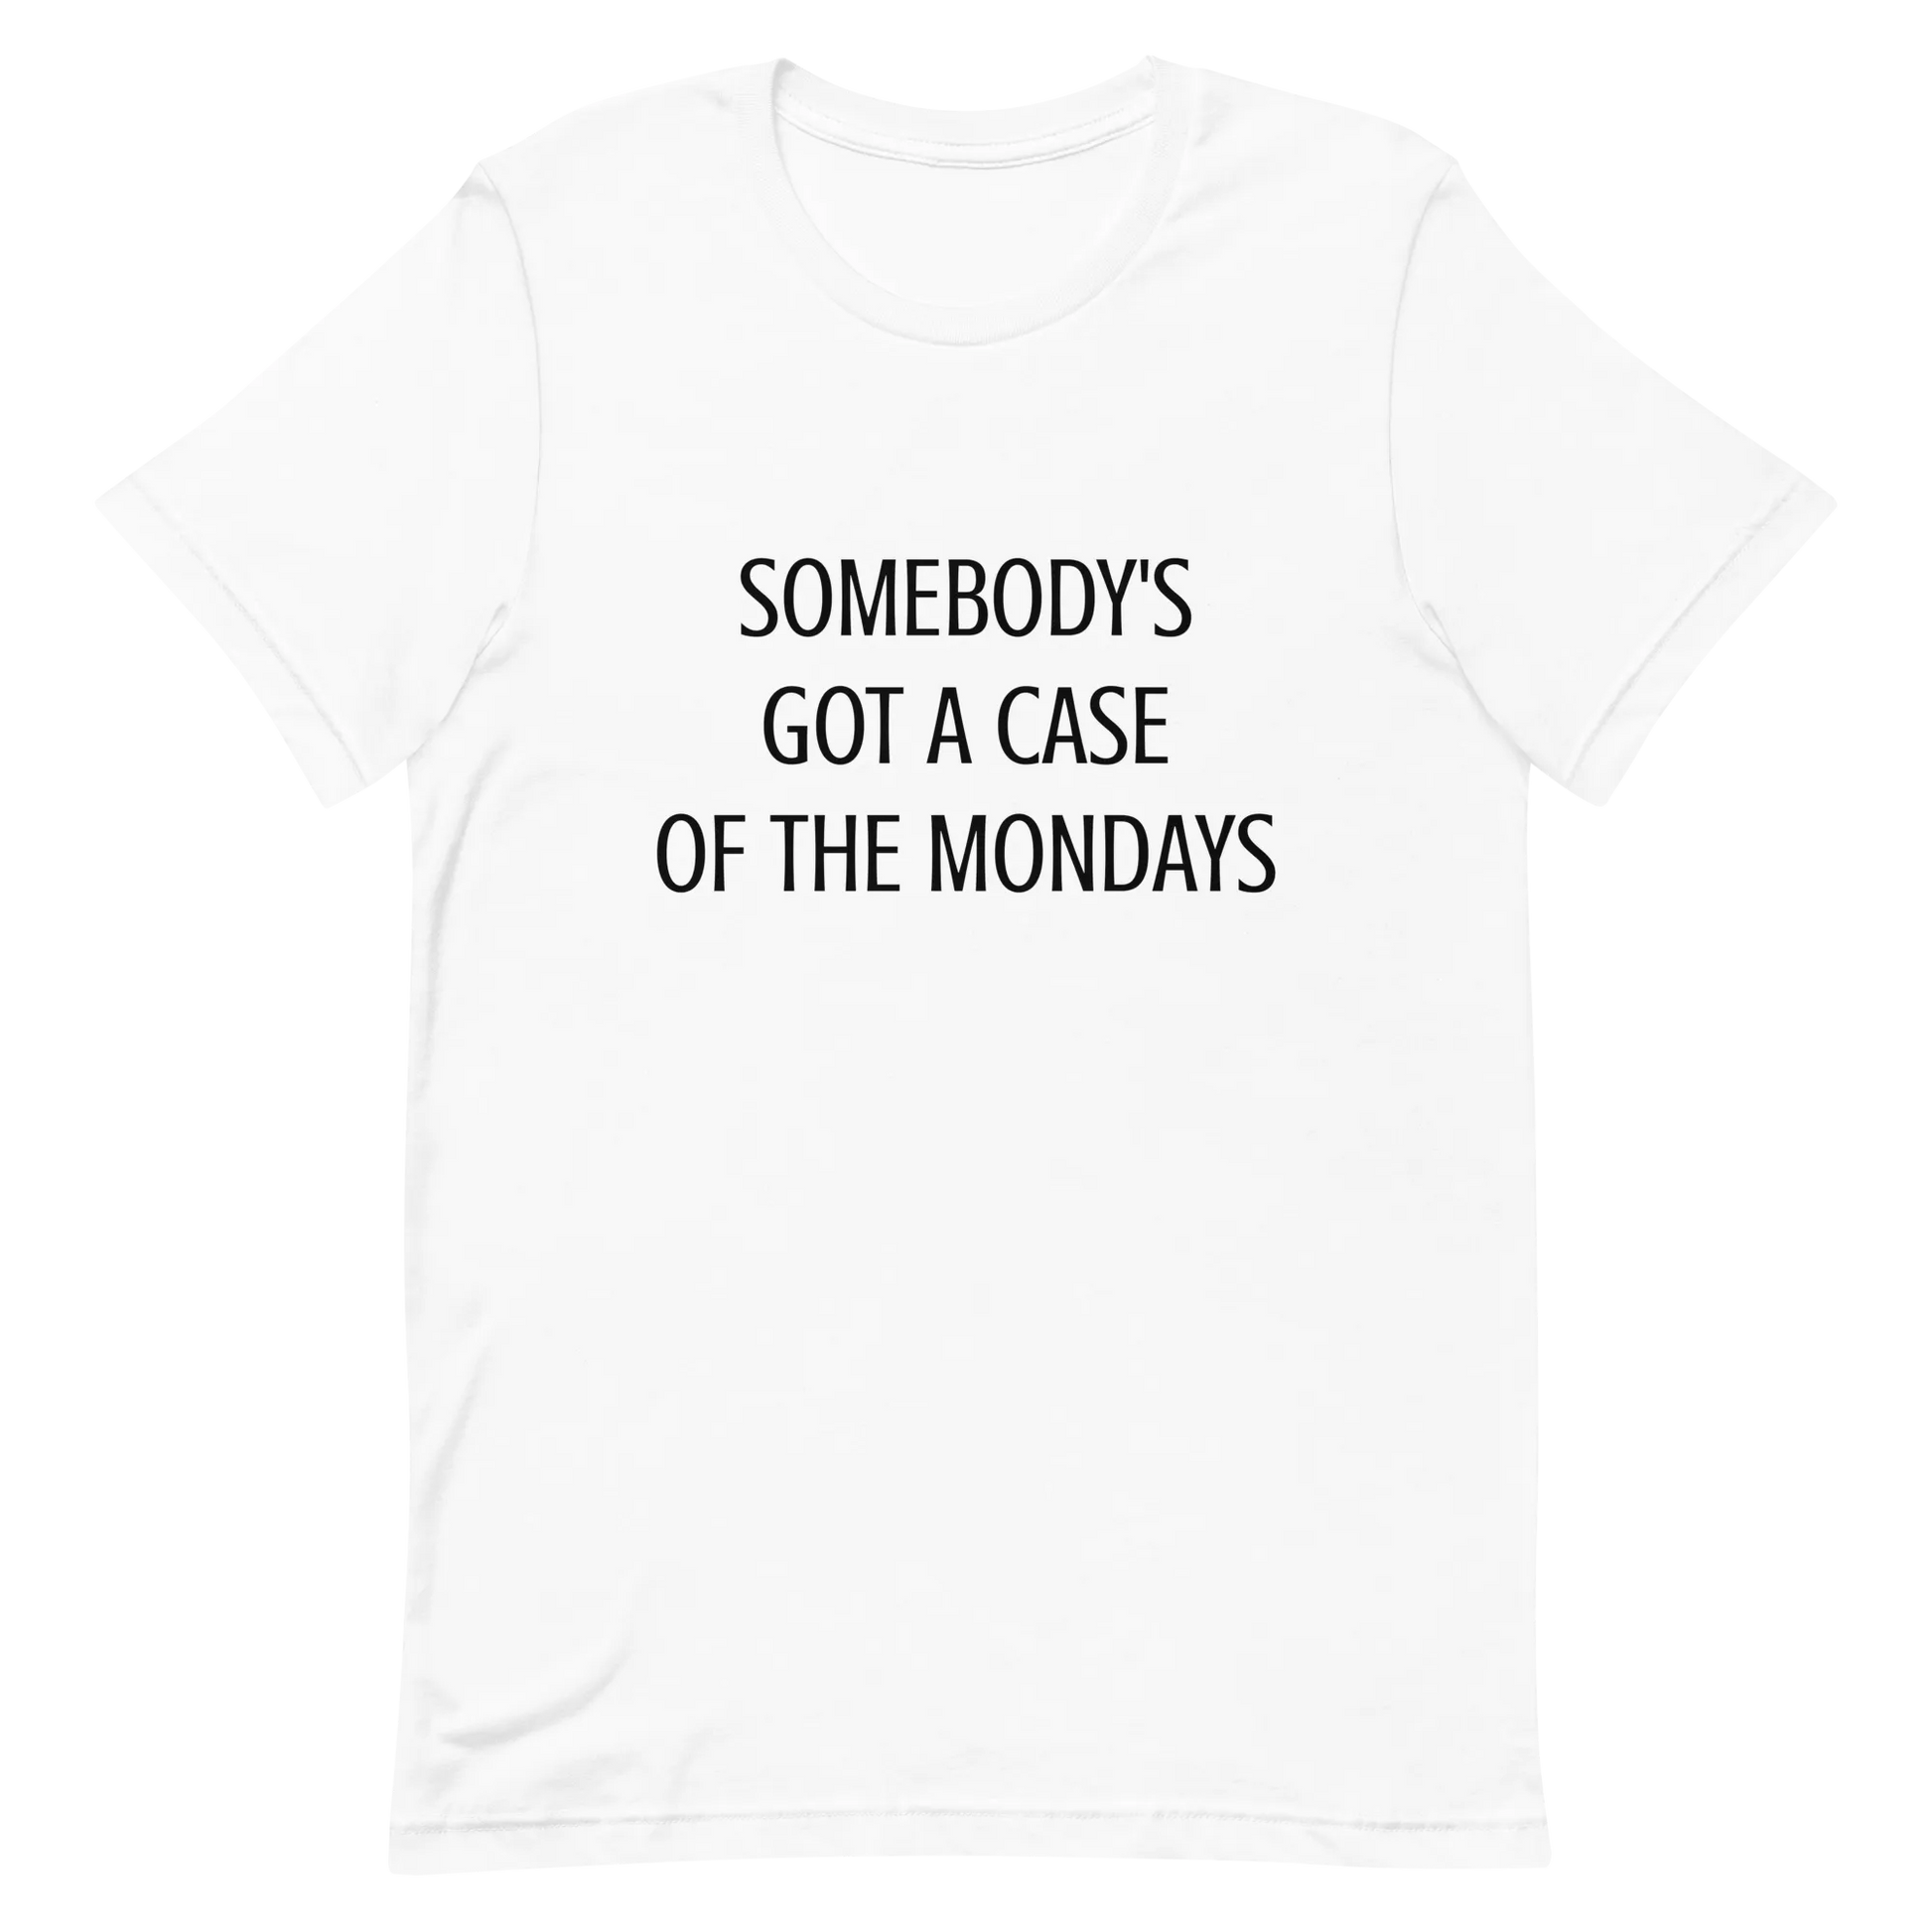 Somebody's Got a Case of the Mondays Tee in White flatlay